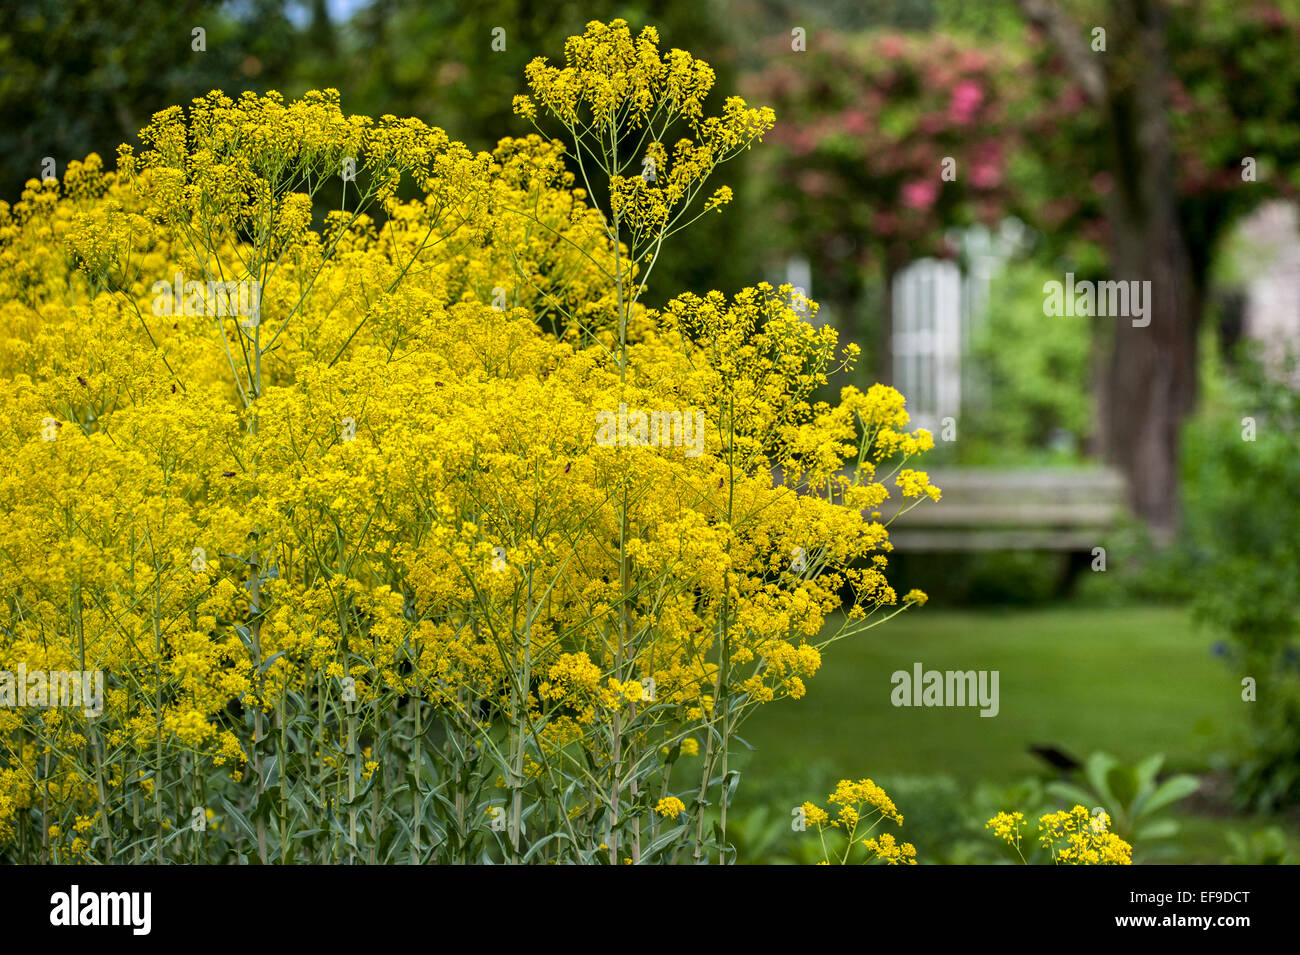 Woad stock photography and - Alamy